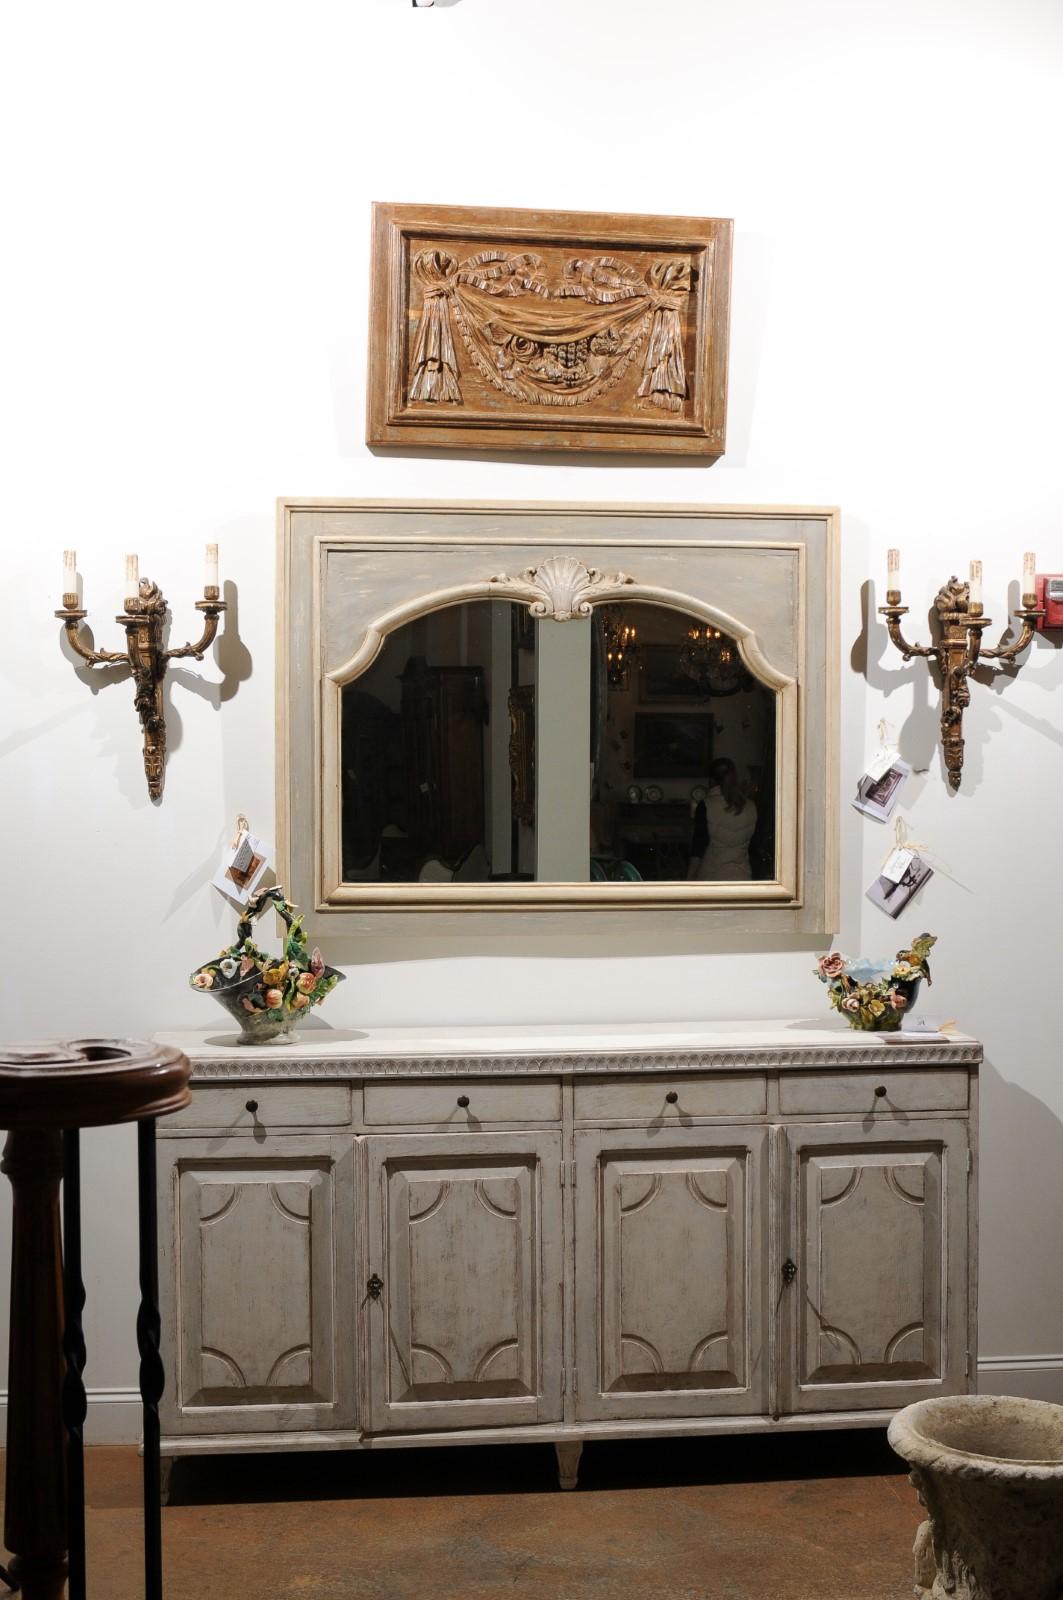 A pair of French hand carved wooden decorative panels from the 18th century, with ribbon-tied swags, flowers and fruits. Born in France during the Age of Enlightenment, each of this pair of wooden architectural panels features a swag, hand carved in